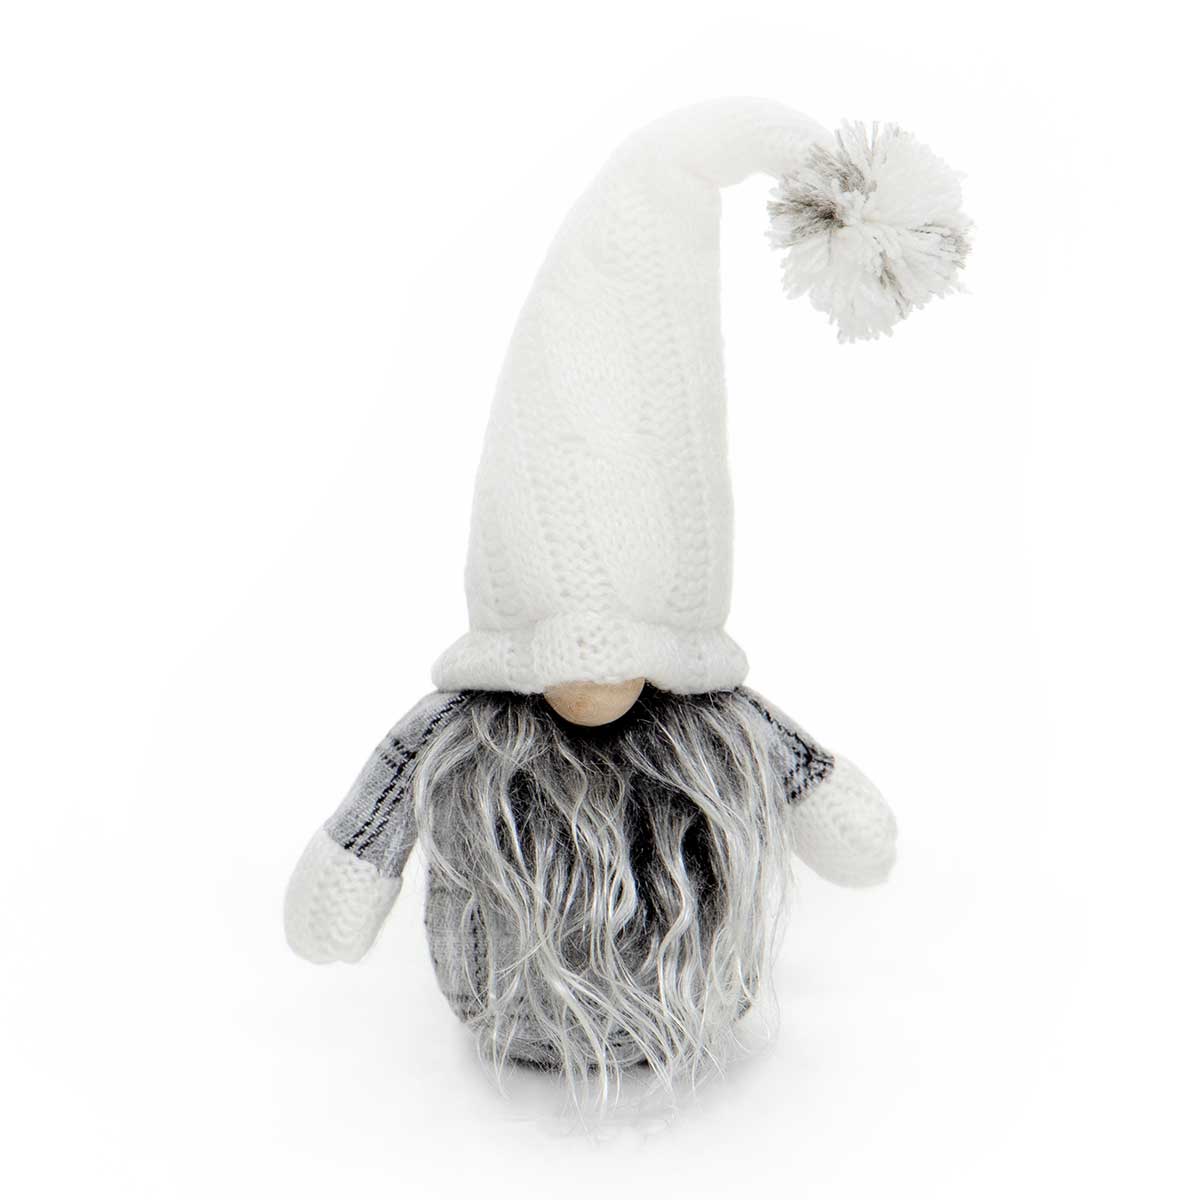 !POM-POM GNOME GREY/CREAM WITH WIRED CABLE KNIT SWEATER v22